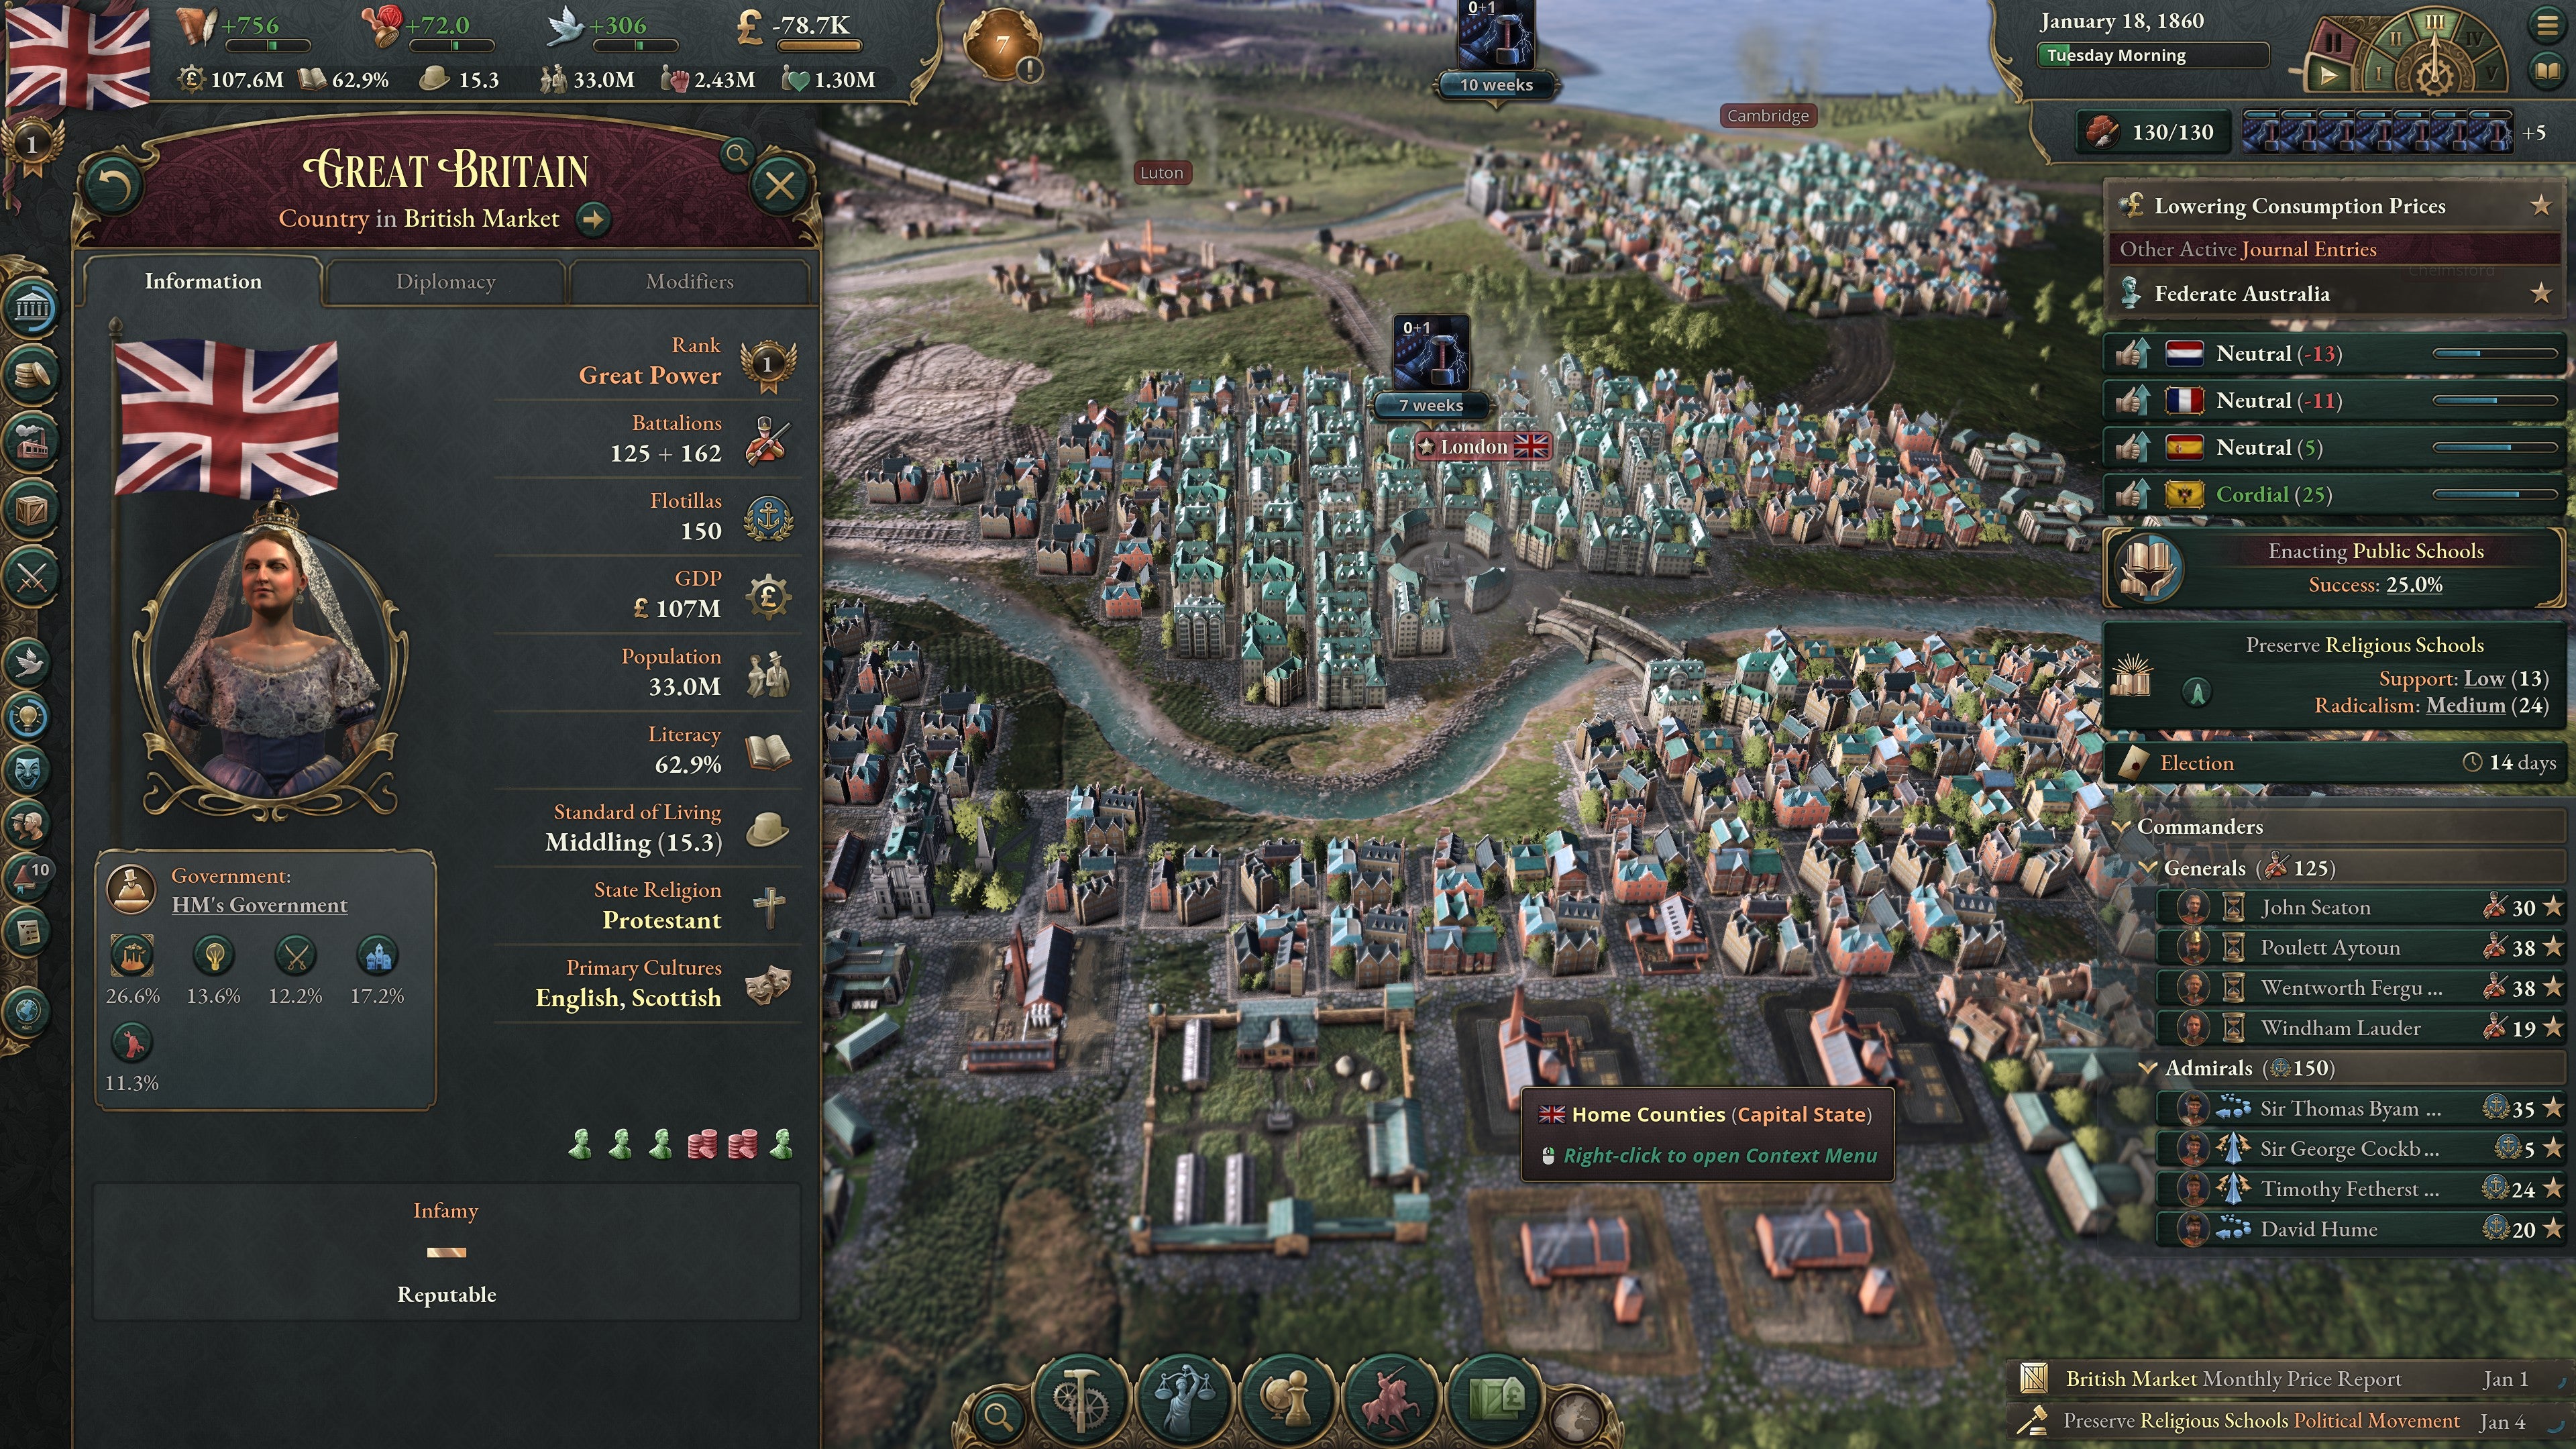 Victoria 3 review - a close up city view of London, Great Britain